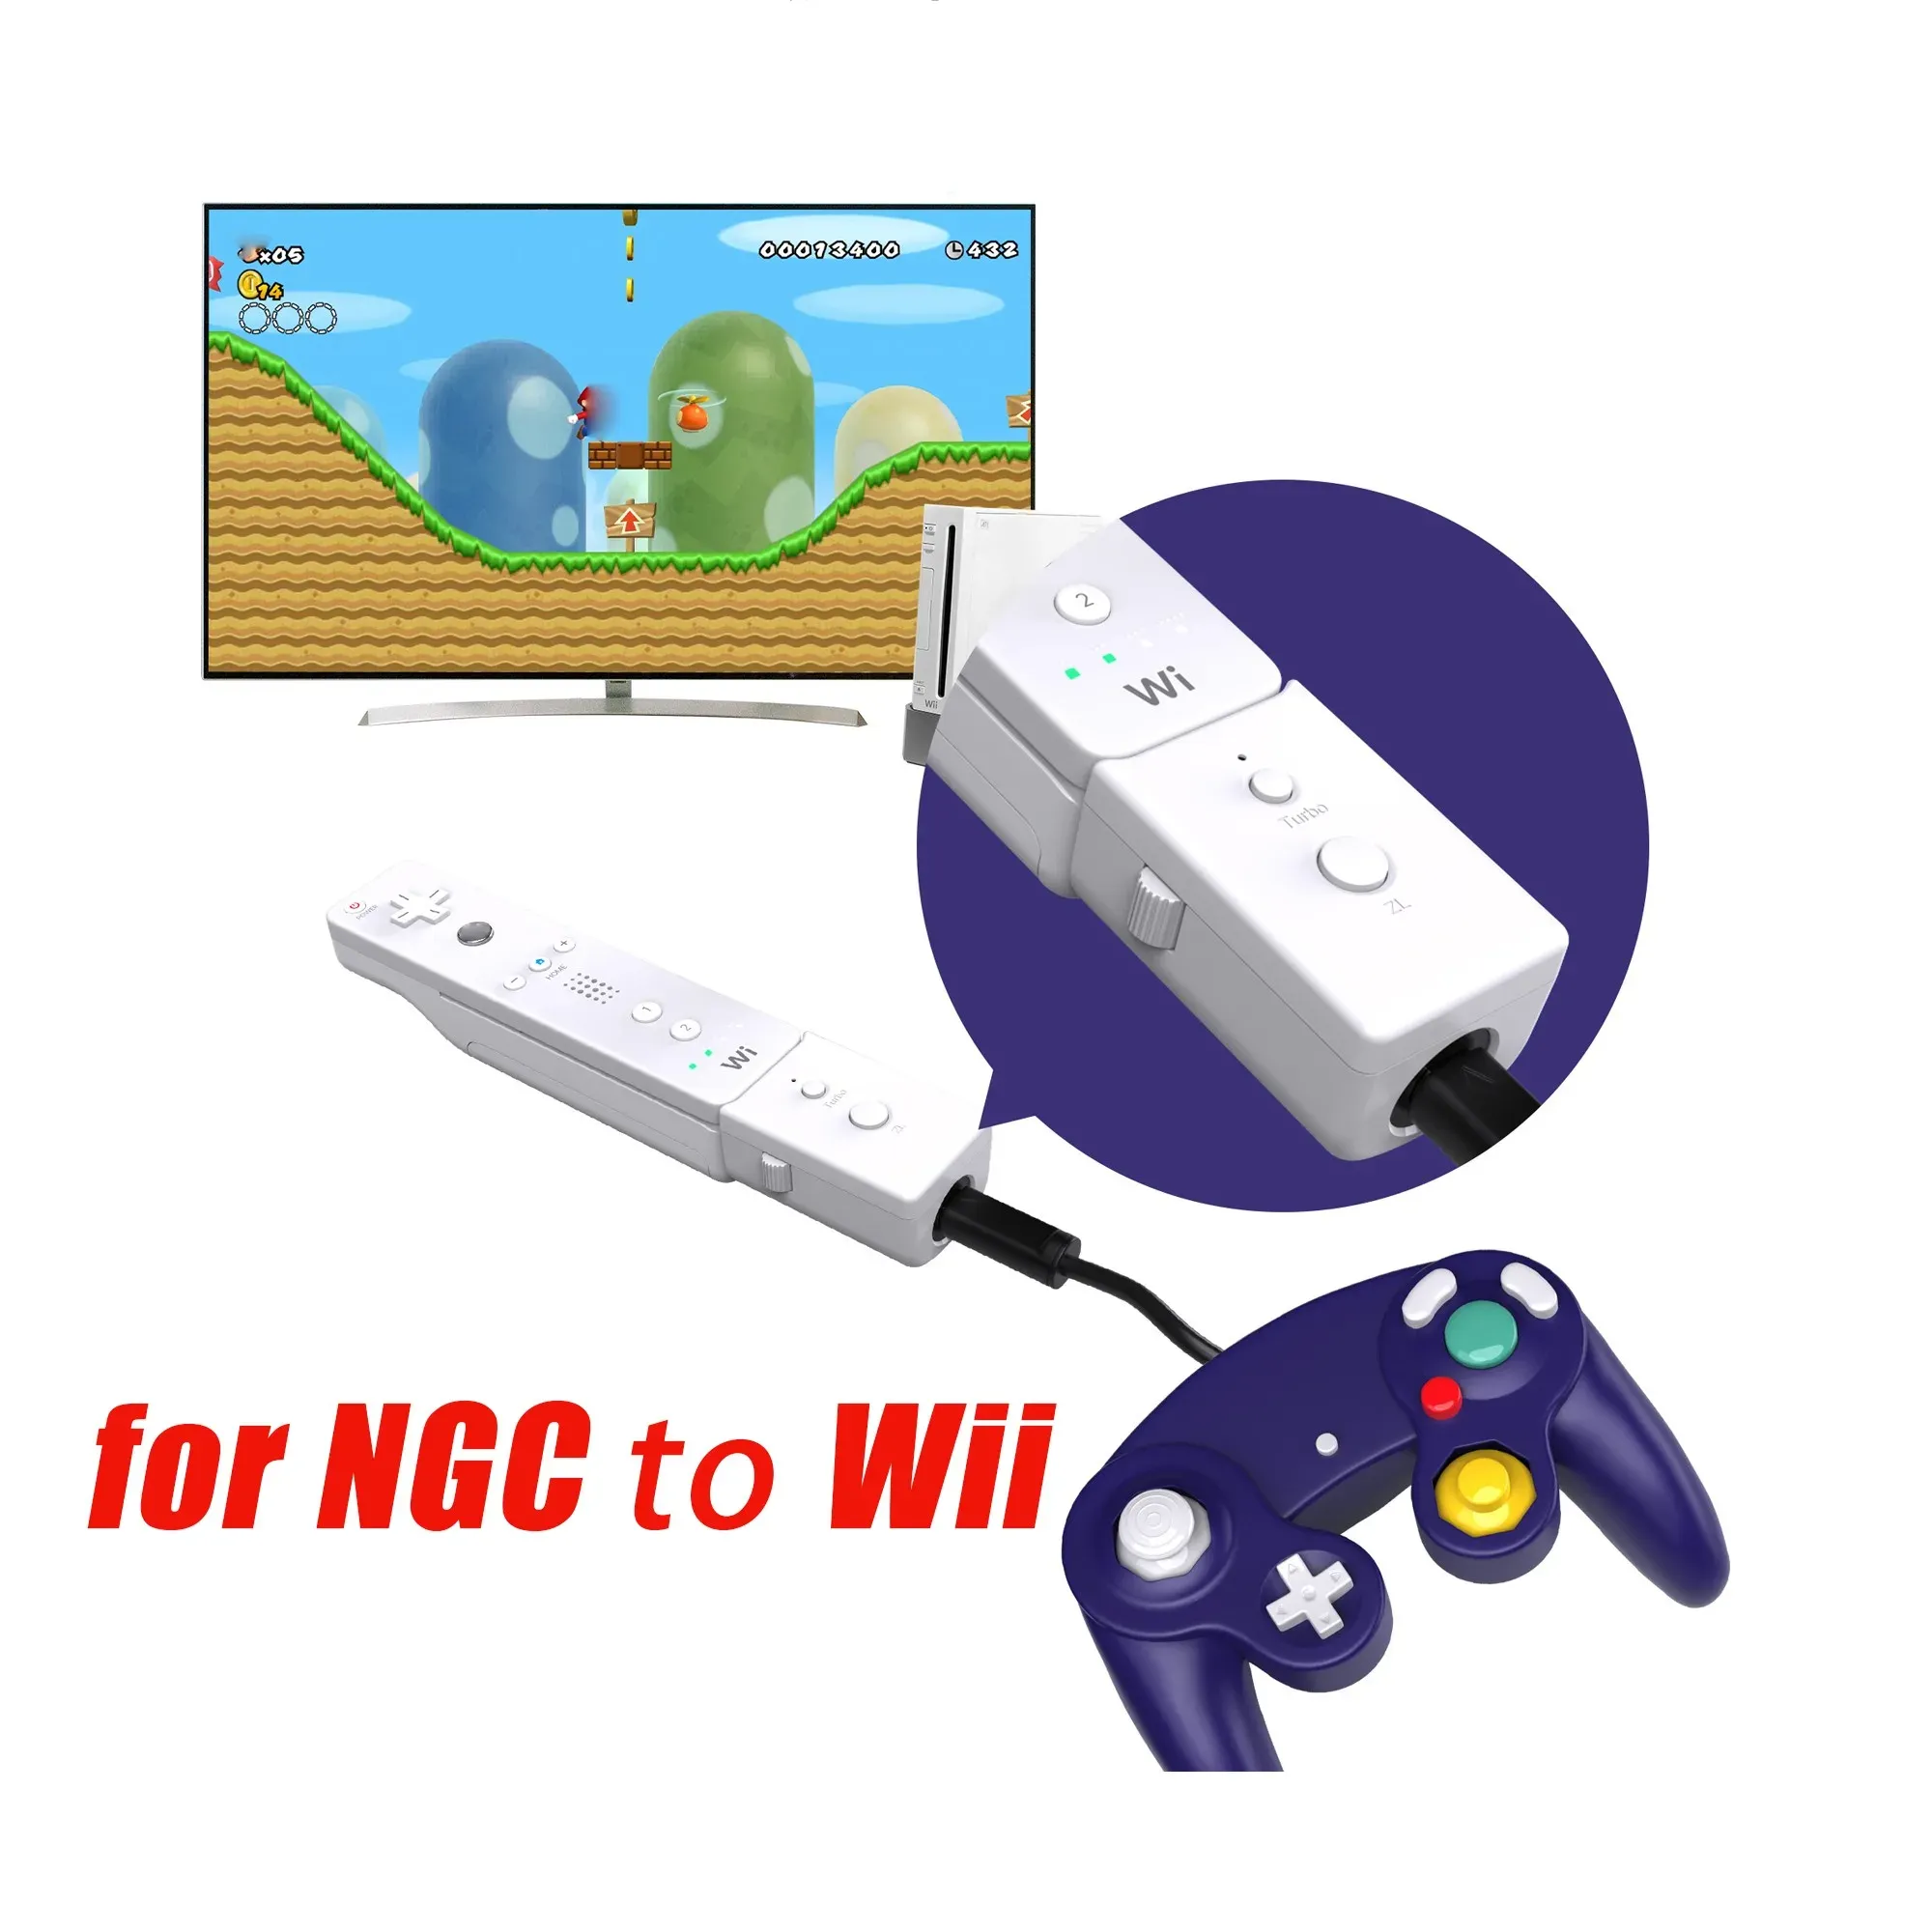 Accessories 1 Set Converter Adapter for Gamecube NGC to Wii controller adapter Game Handle Replacements Accessory